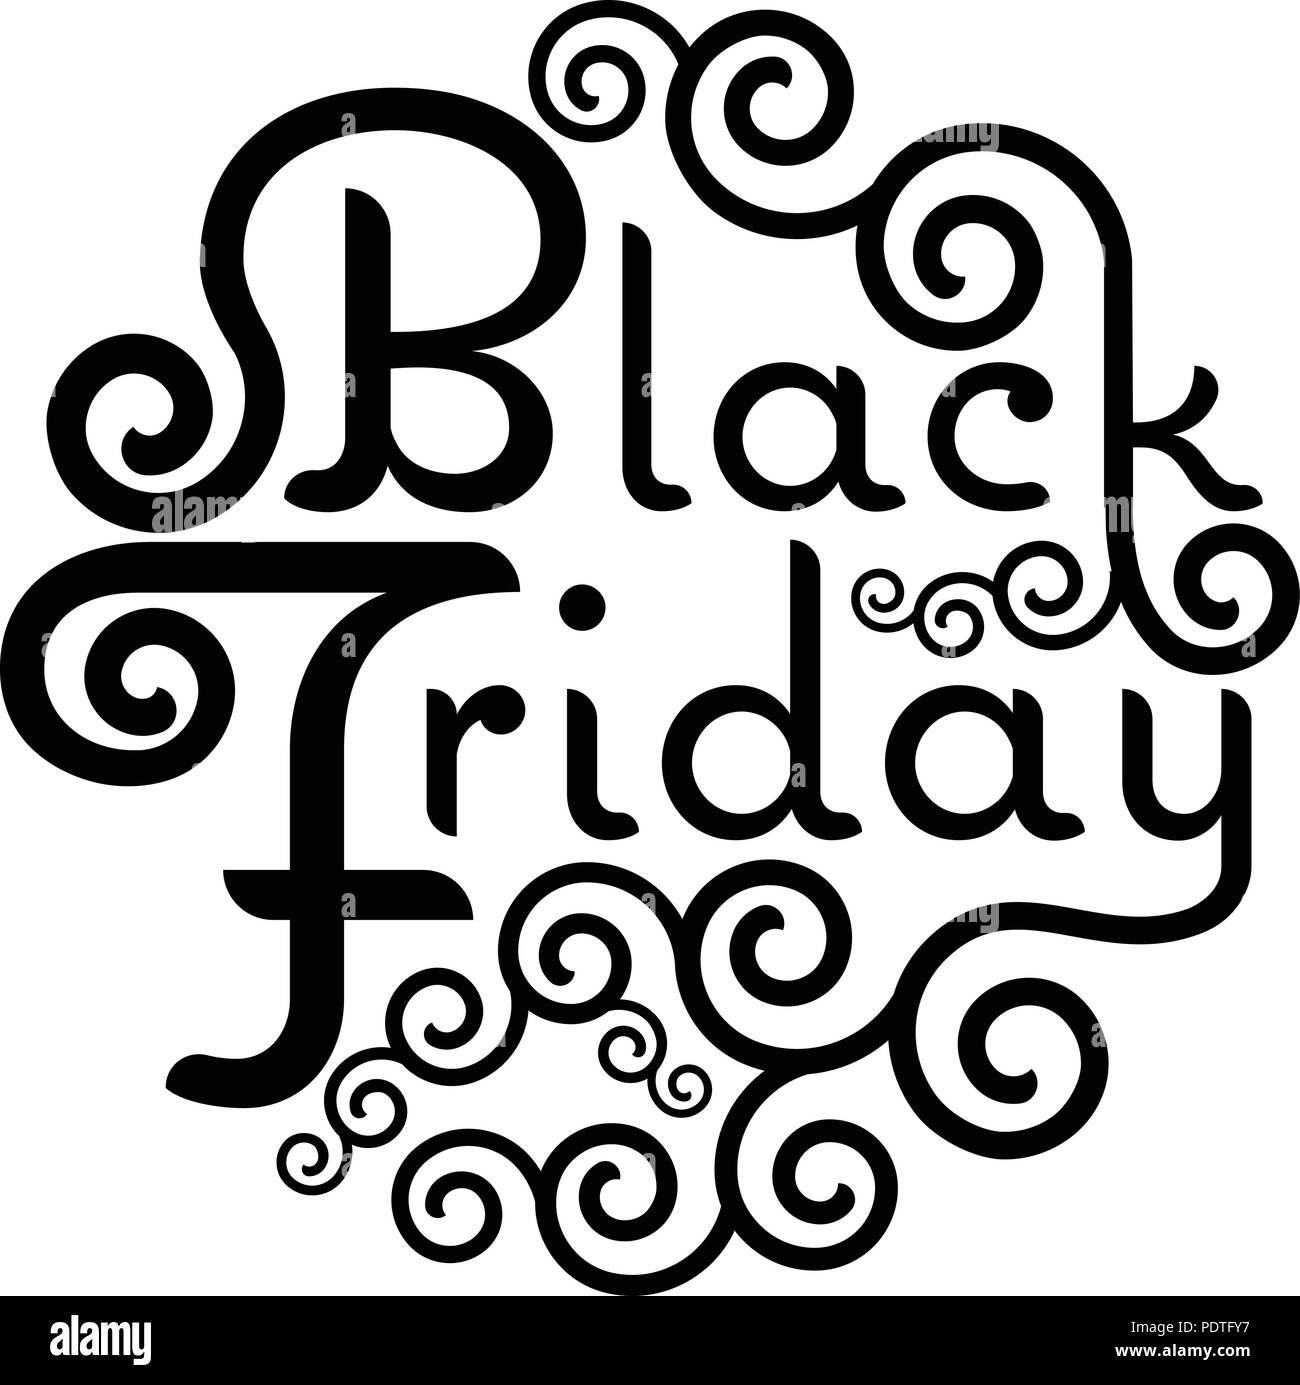 Black Friday Sale vector text Vintage Calligraphy Lettering